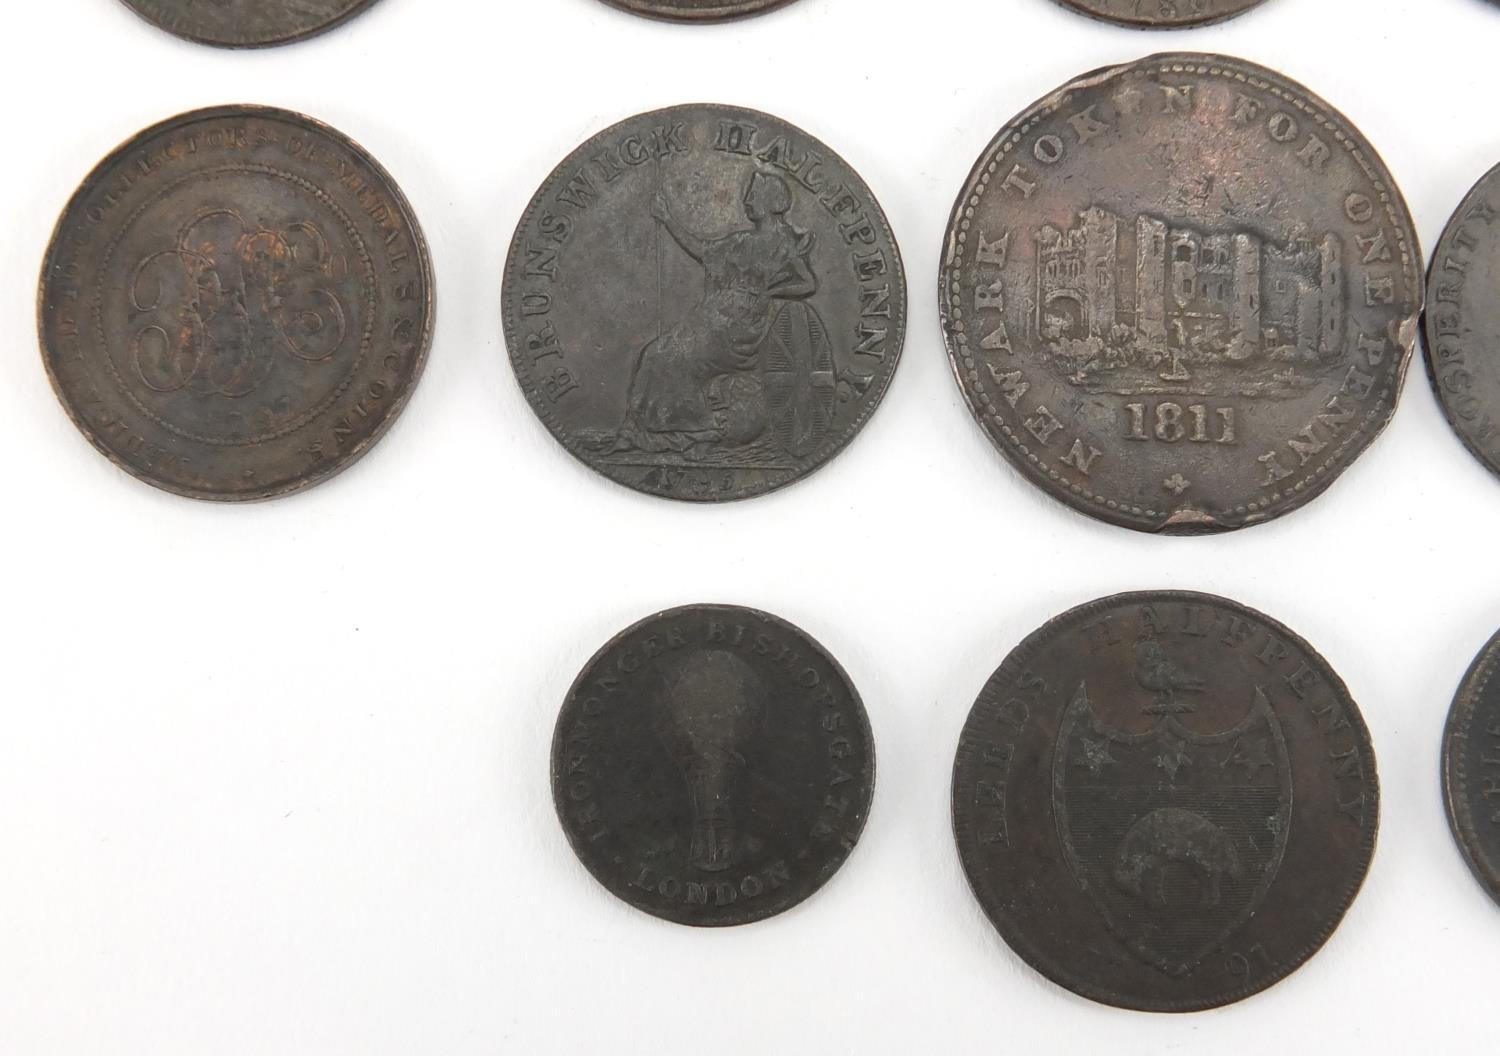 Twenty two late 18th early 19th century tokens and half pennies including Iohn of Gaunt Duke of - Image 9 of 10